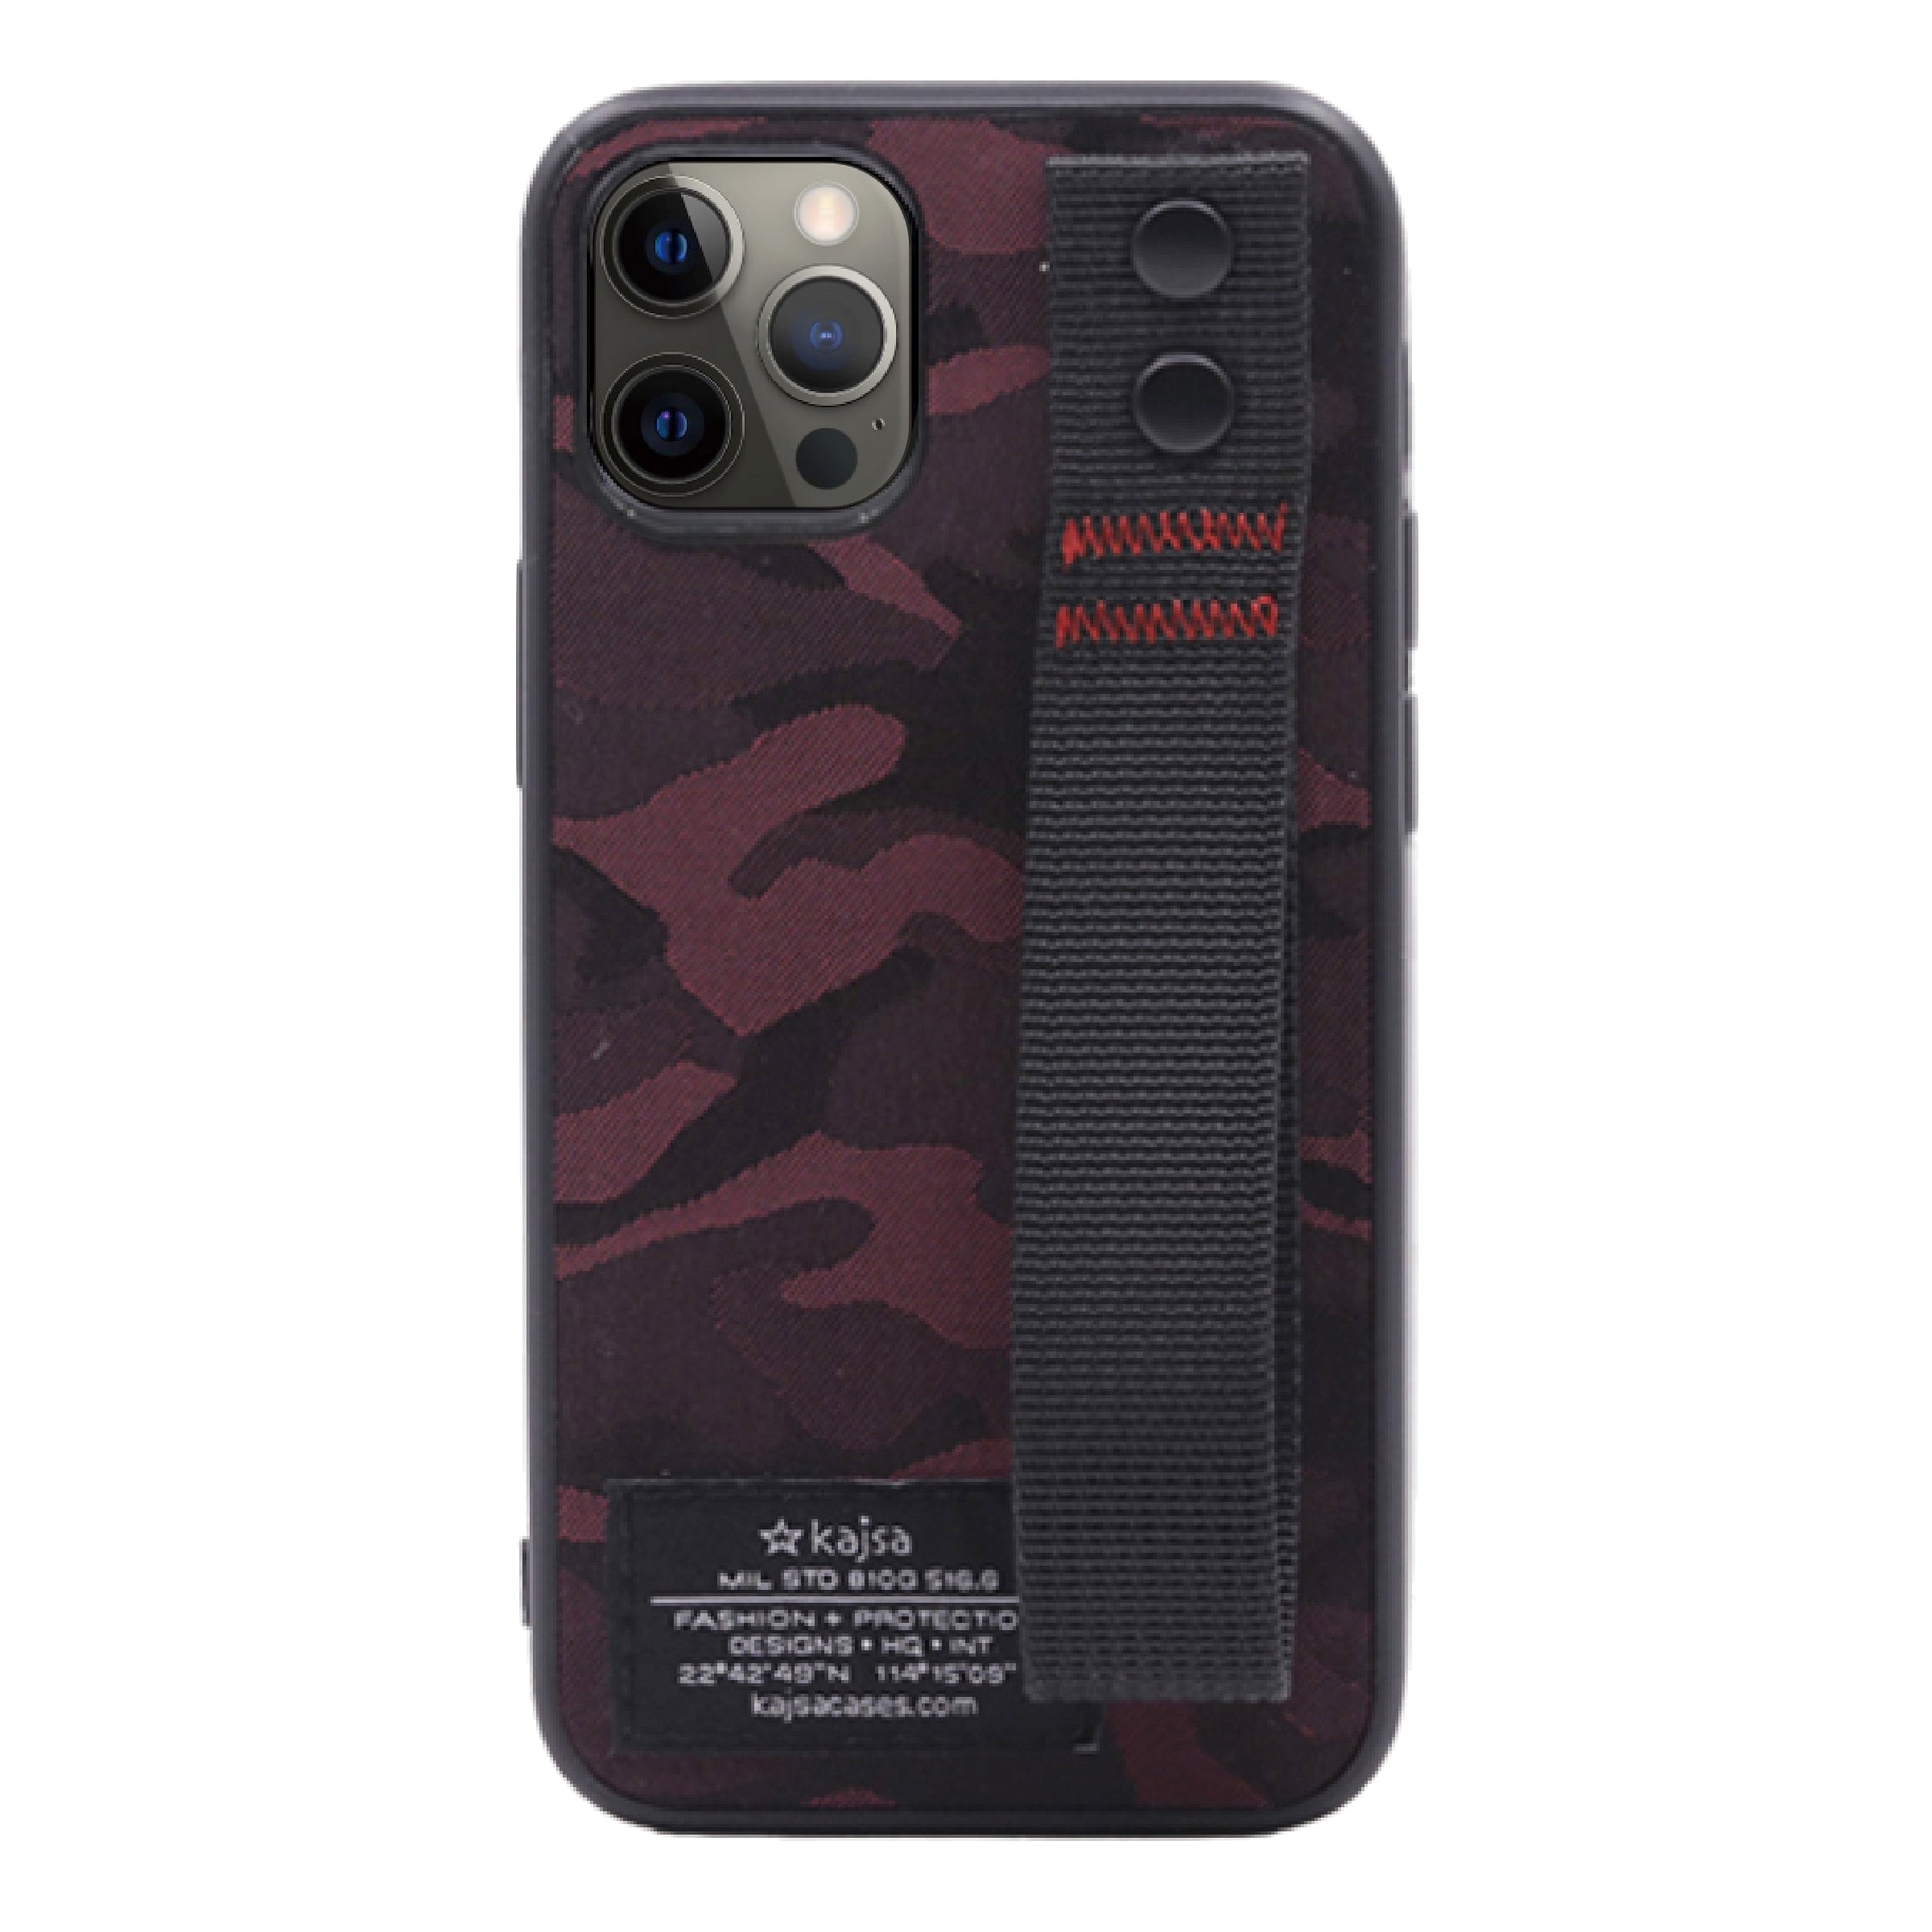 Outdoor Collection - Camo Satin back case for iPhone 12-Phone Case- phone case - phone cases- phone cover- iphone cover- iphone case- iphone cases- leather case- leather cases- DIYCASE - custom case - leather cover - hand strap case - croco pattern case - snake pattern case - carbon fiber phone case - phone case brand - unique phone case - high quality - phone case brand - protective case - buy phone case hong kong - online buy phone case - iphone‎手機殼 - 客製化手機殼 - samsung ‎手機殼 - 香港手機殼 - 買電話殼